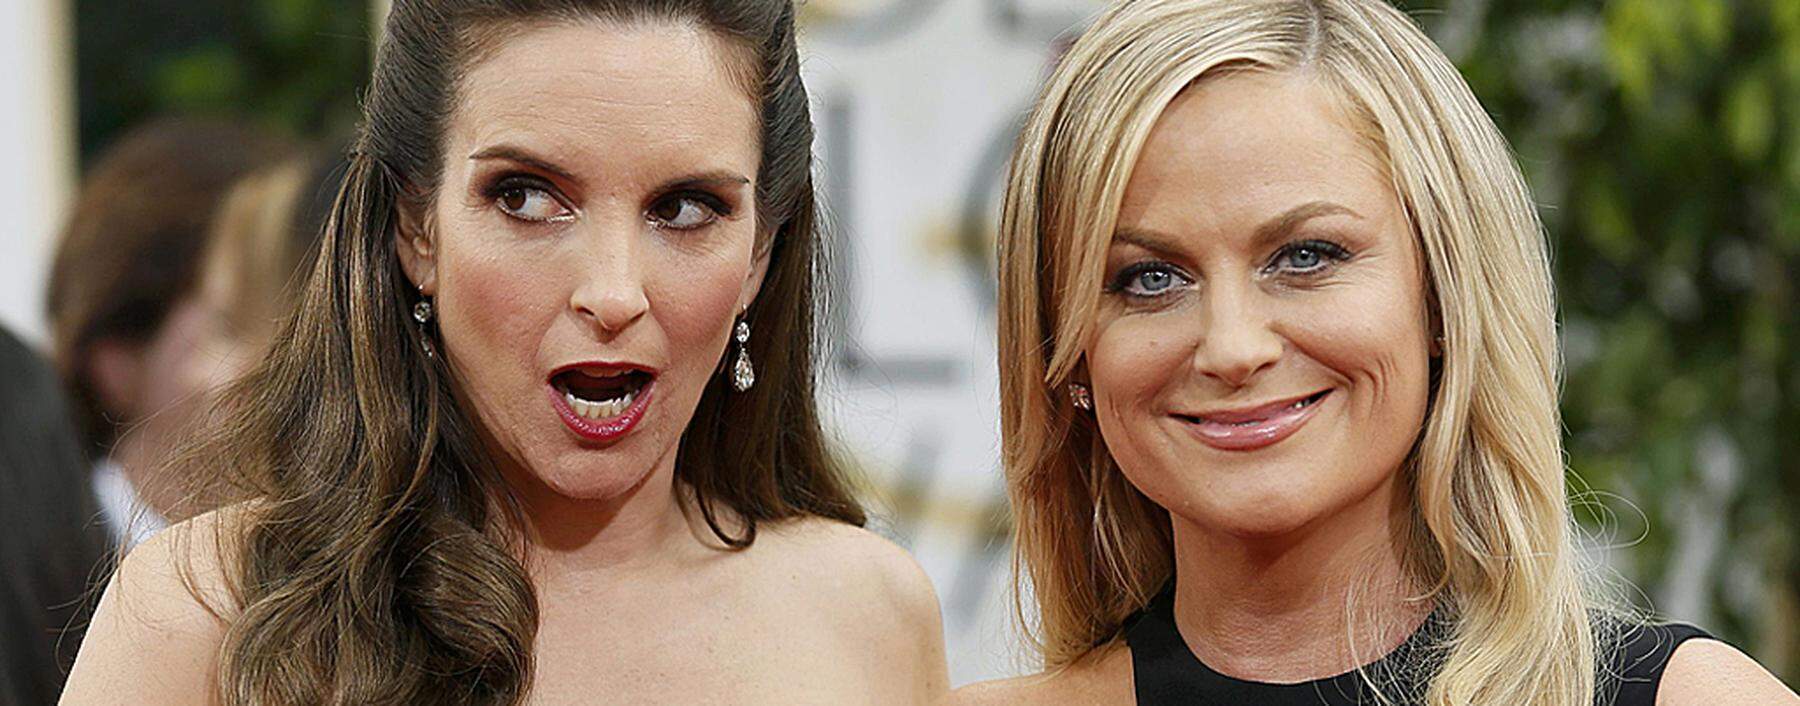 Golden Globes hosts Tina Fey and Amy Poehler pose at the 71st annual Golden Globe Awards in Beverly Hills